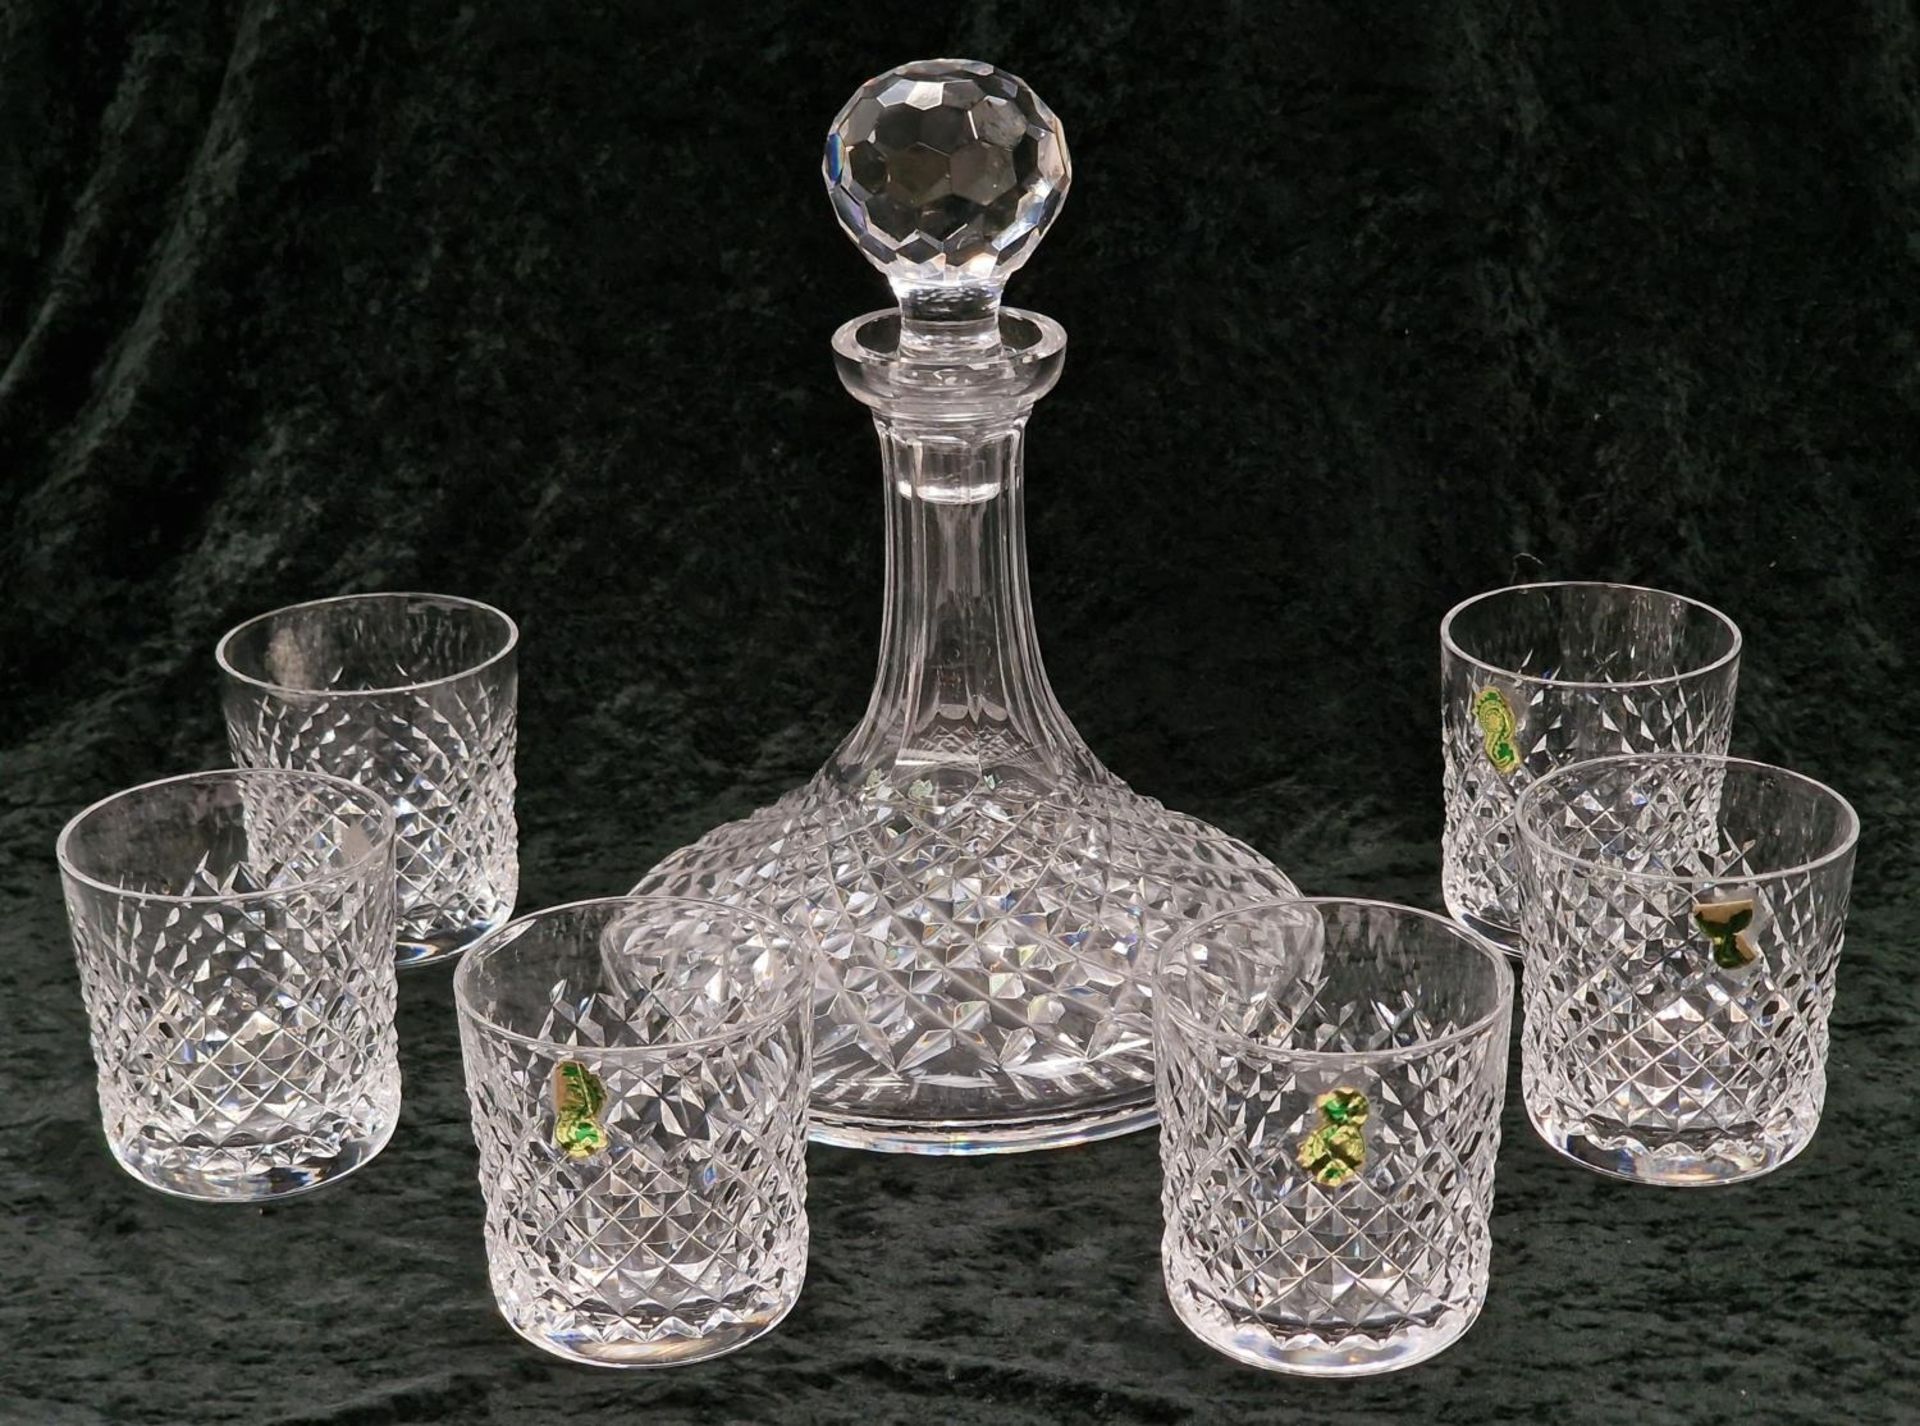 Waterford Crystal Alana Old Fashioned ships decanter together with a matching set of six whisky